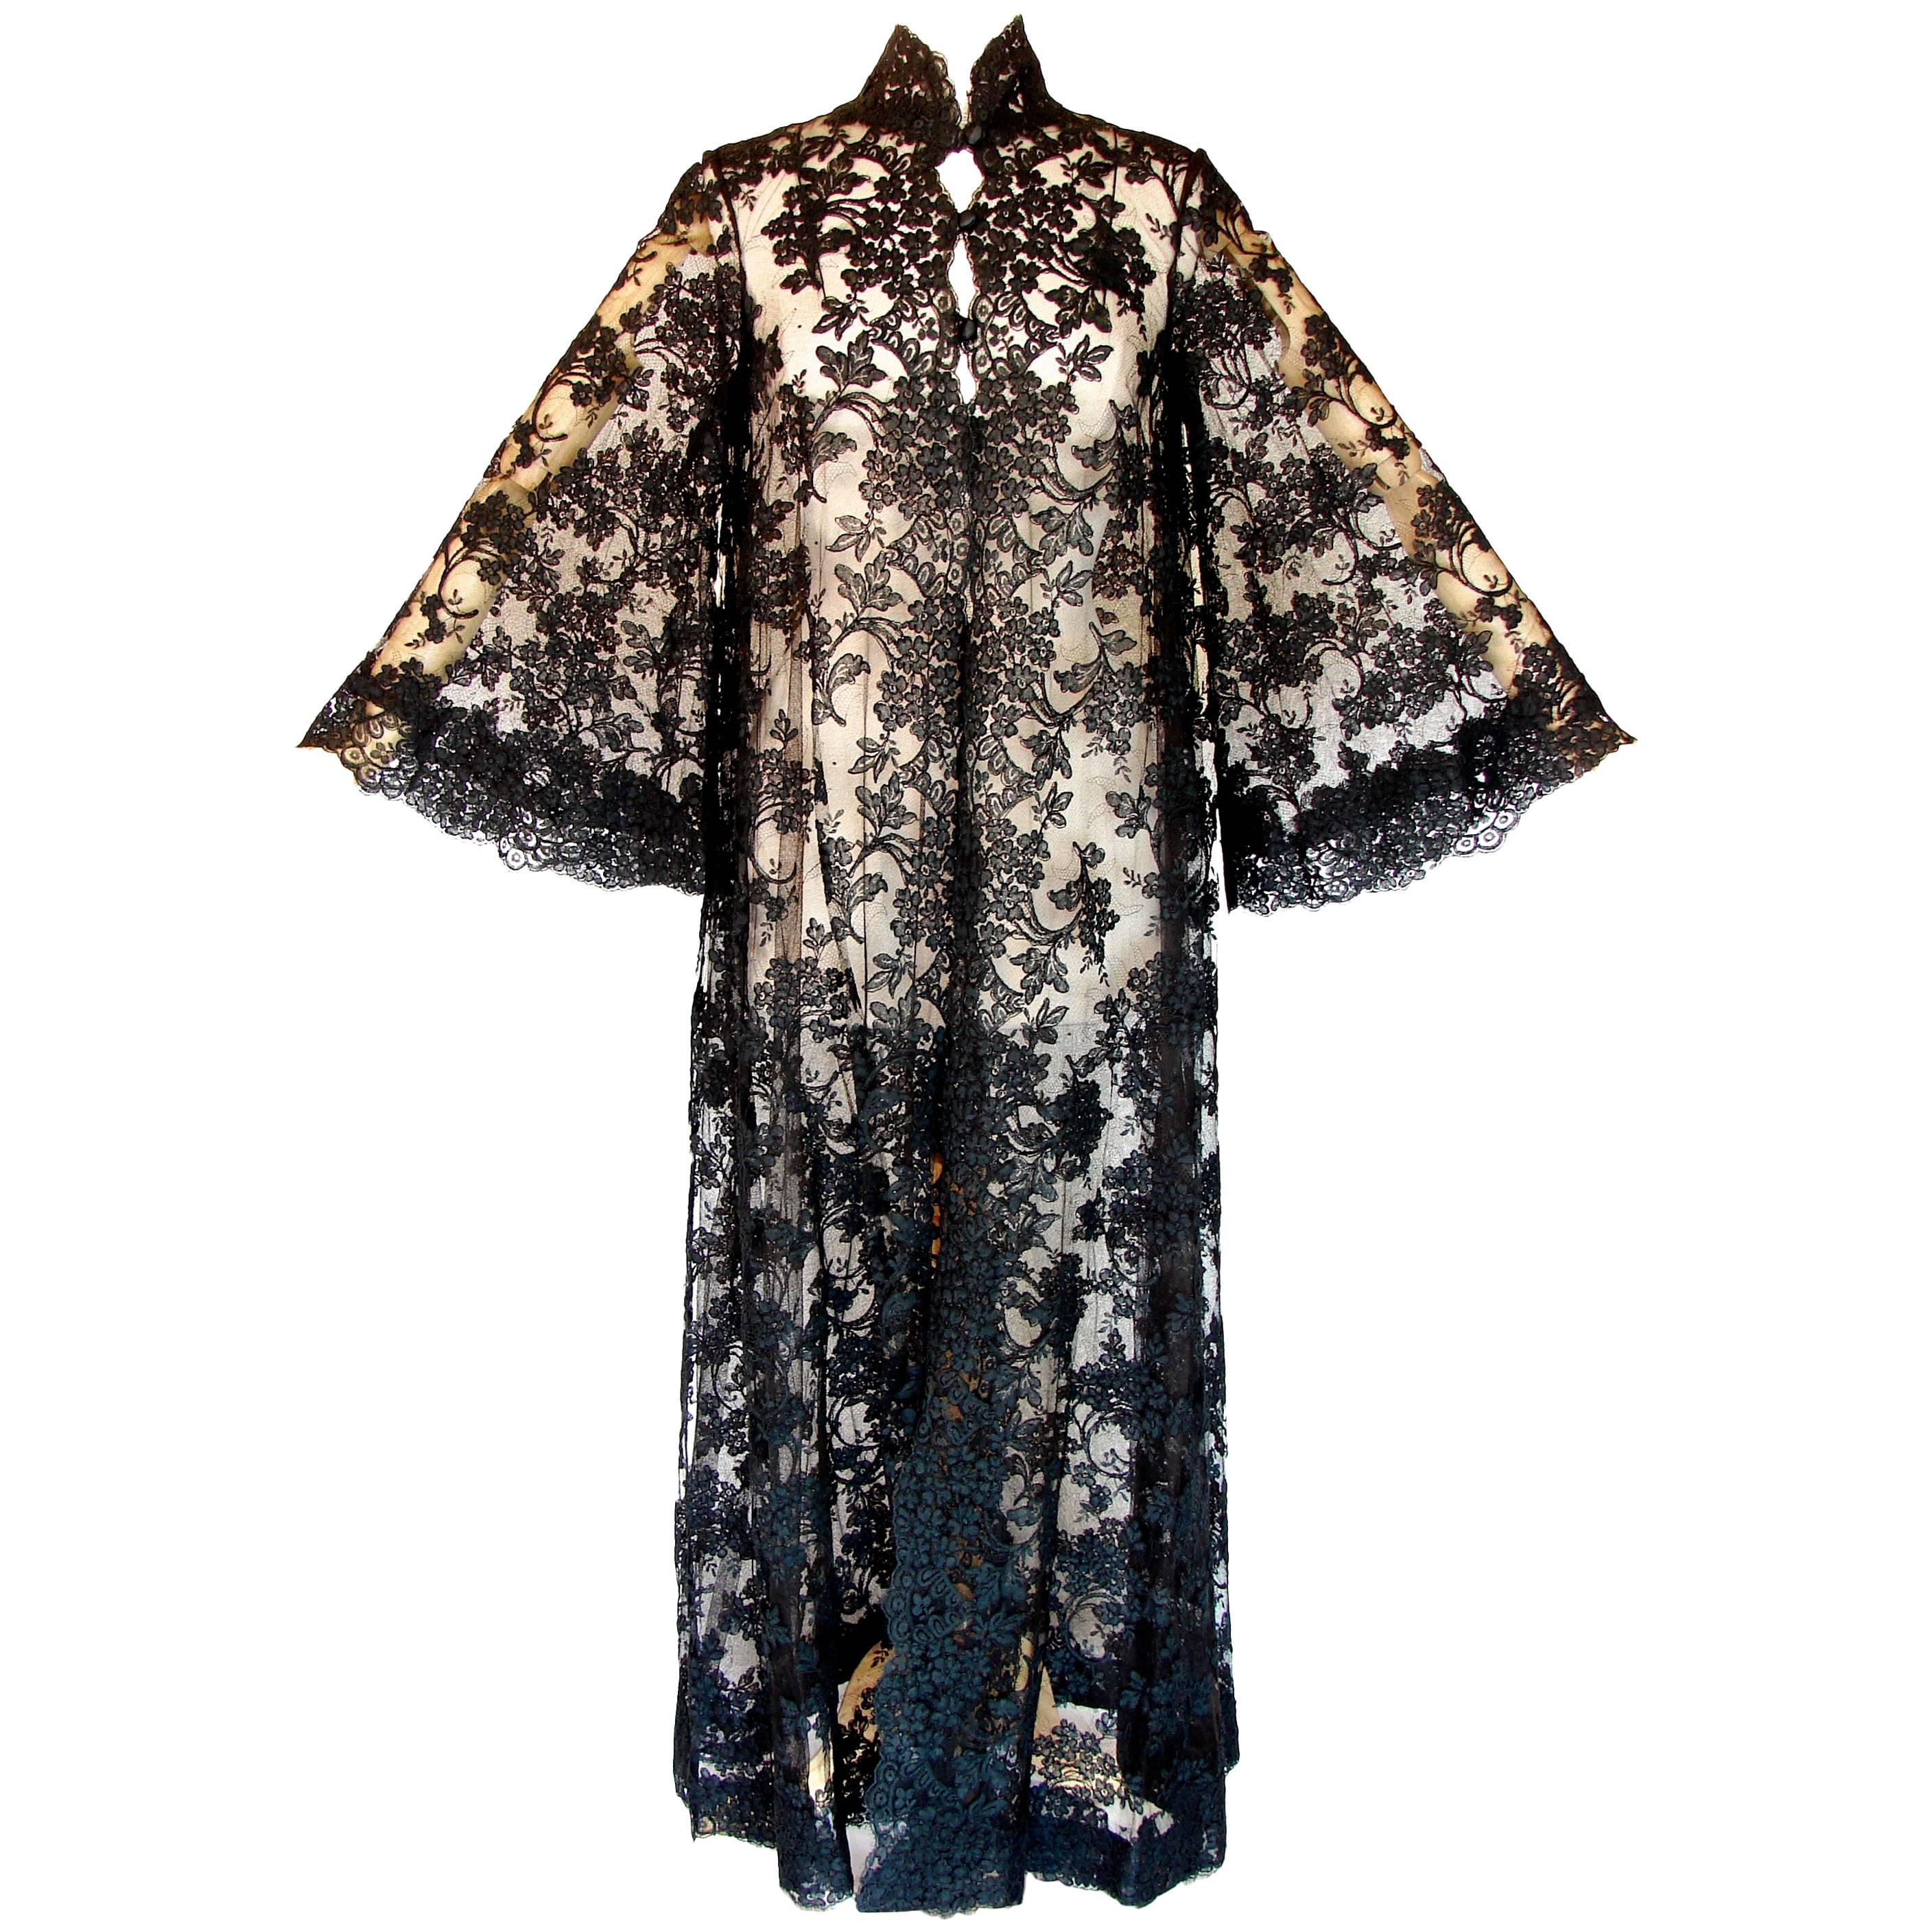 Ron Amey Attr. Fabulous Black Lace Opera Coat with Angel Sleeves Size M 1970s